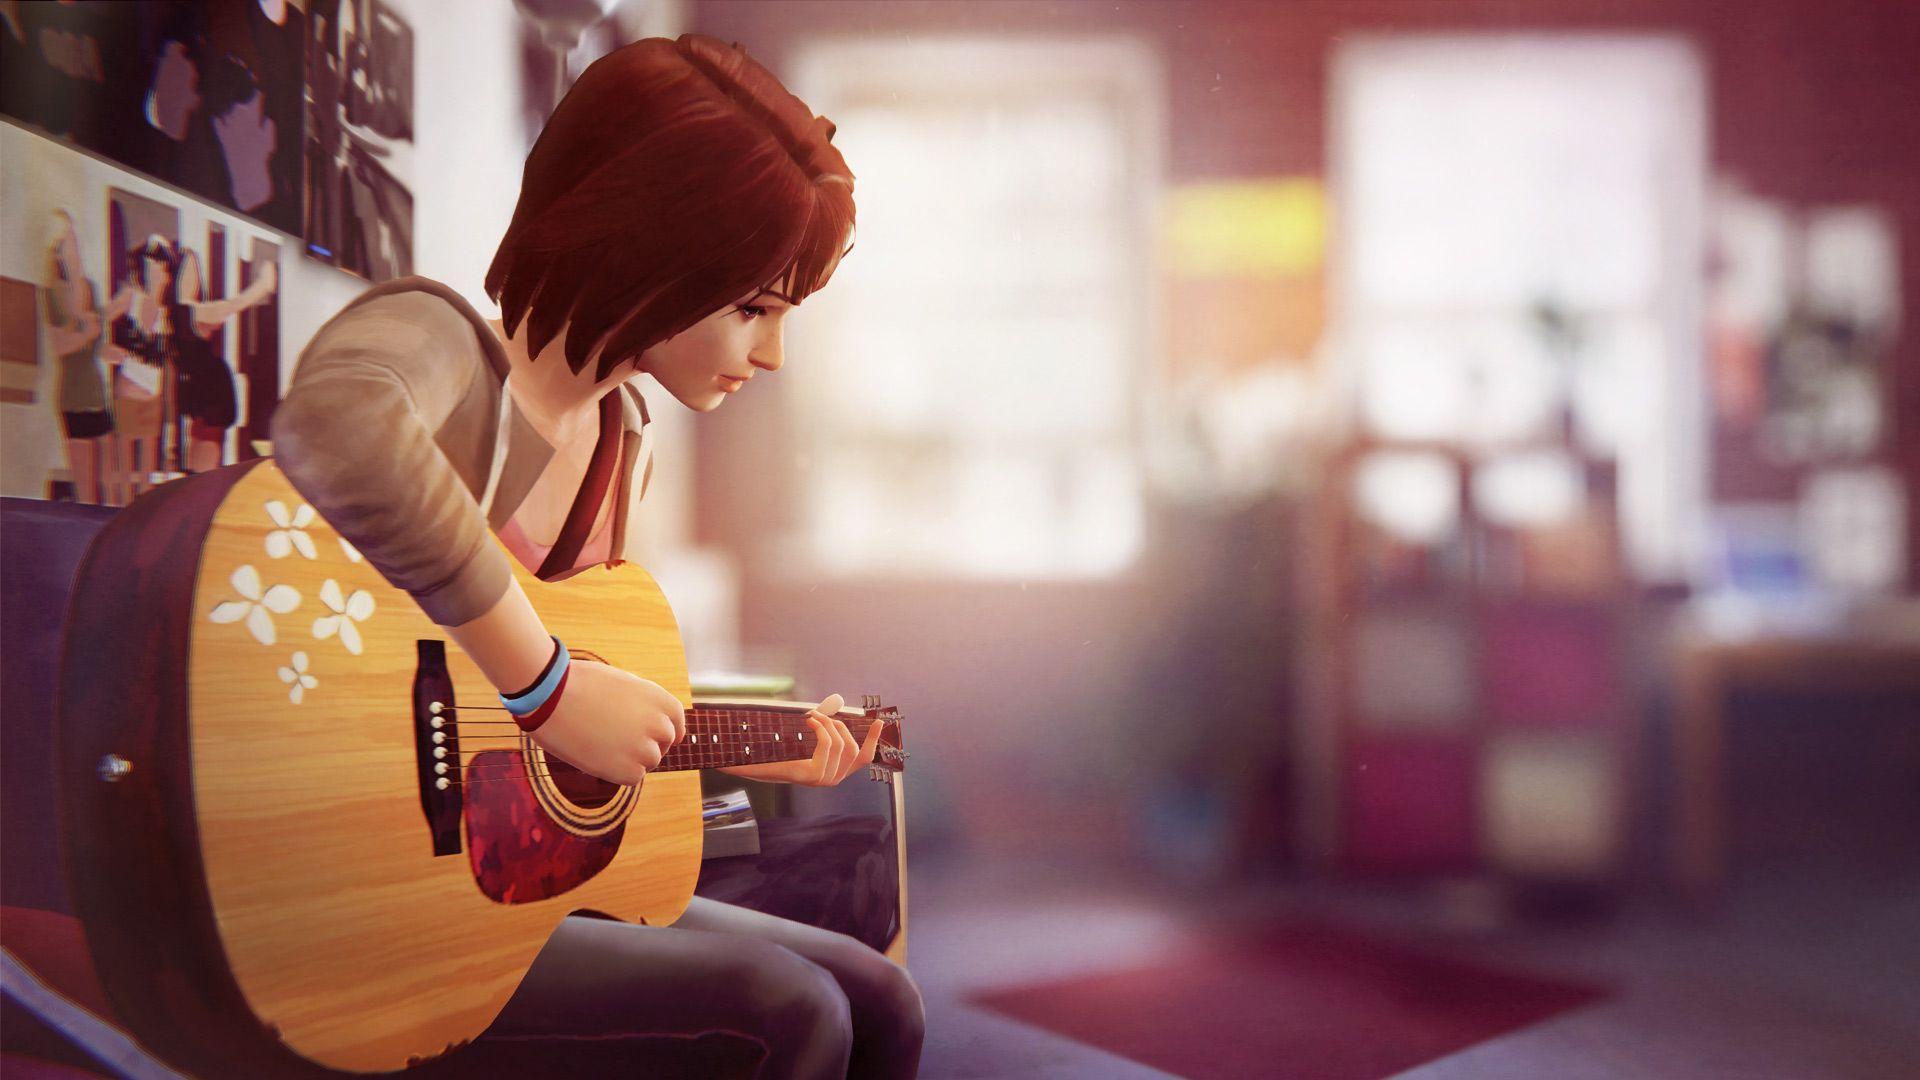 Excellent HD Quality Wallpaper&;s Collection: Life Is Strange